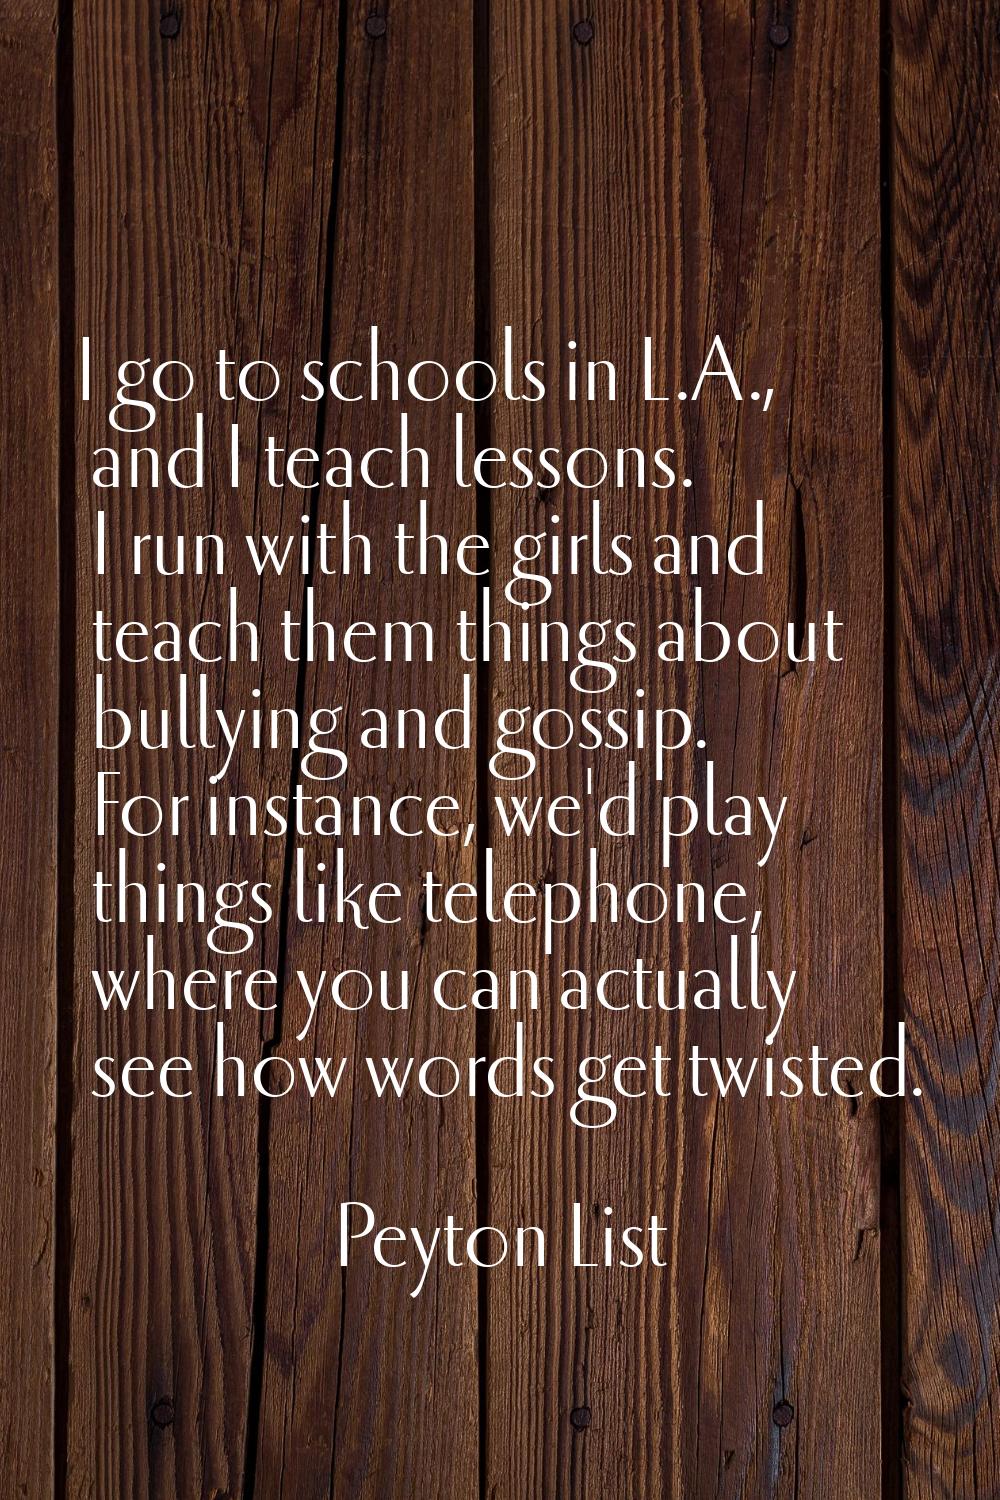 I go to schools in L.A., and I teach lessons. I run with the girls and teach them things about bull